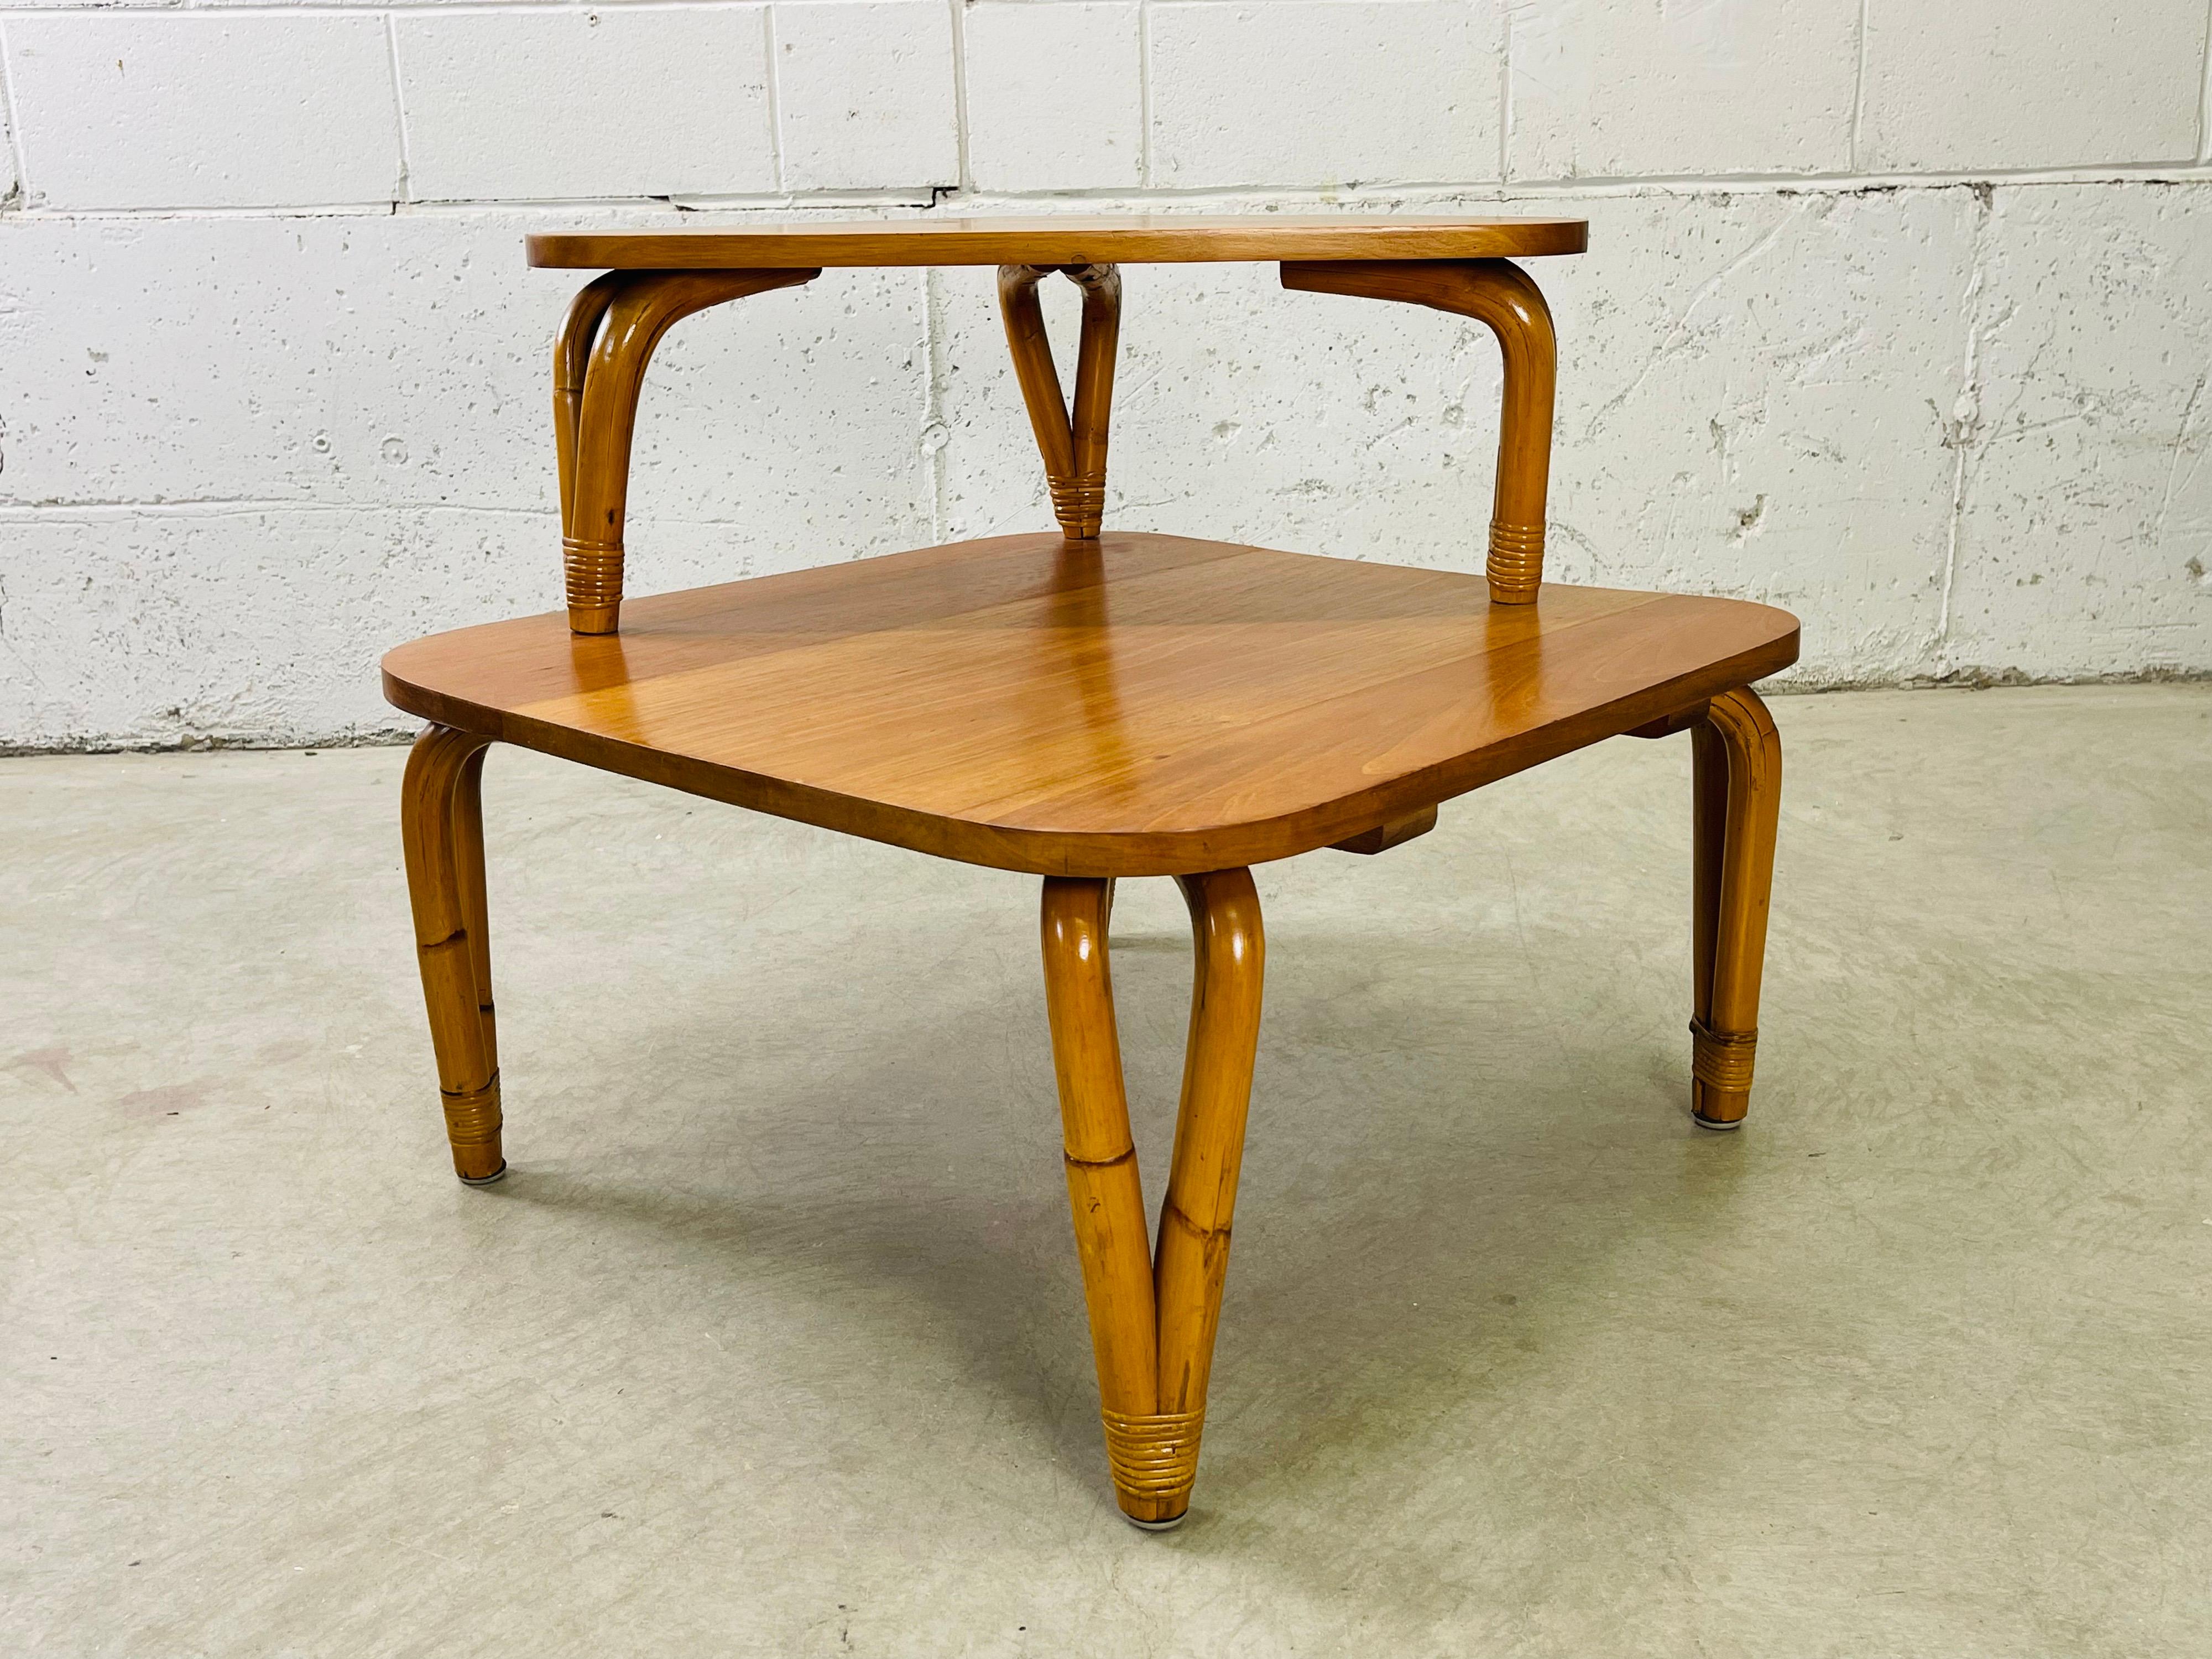 1950s Rattan & Mahogany Corner Table In Good Condition For Sale In Amherst, NH